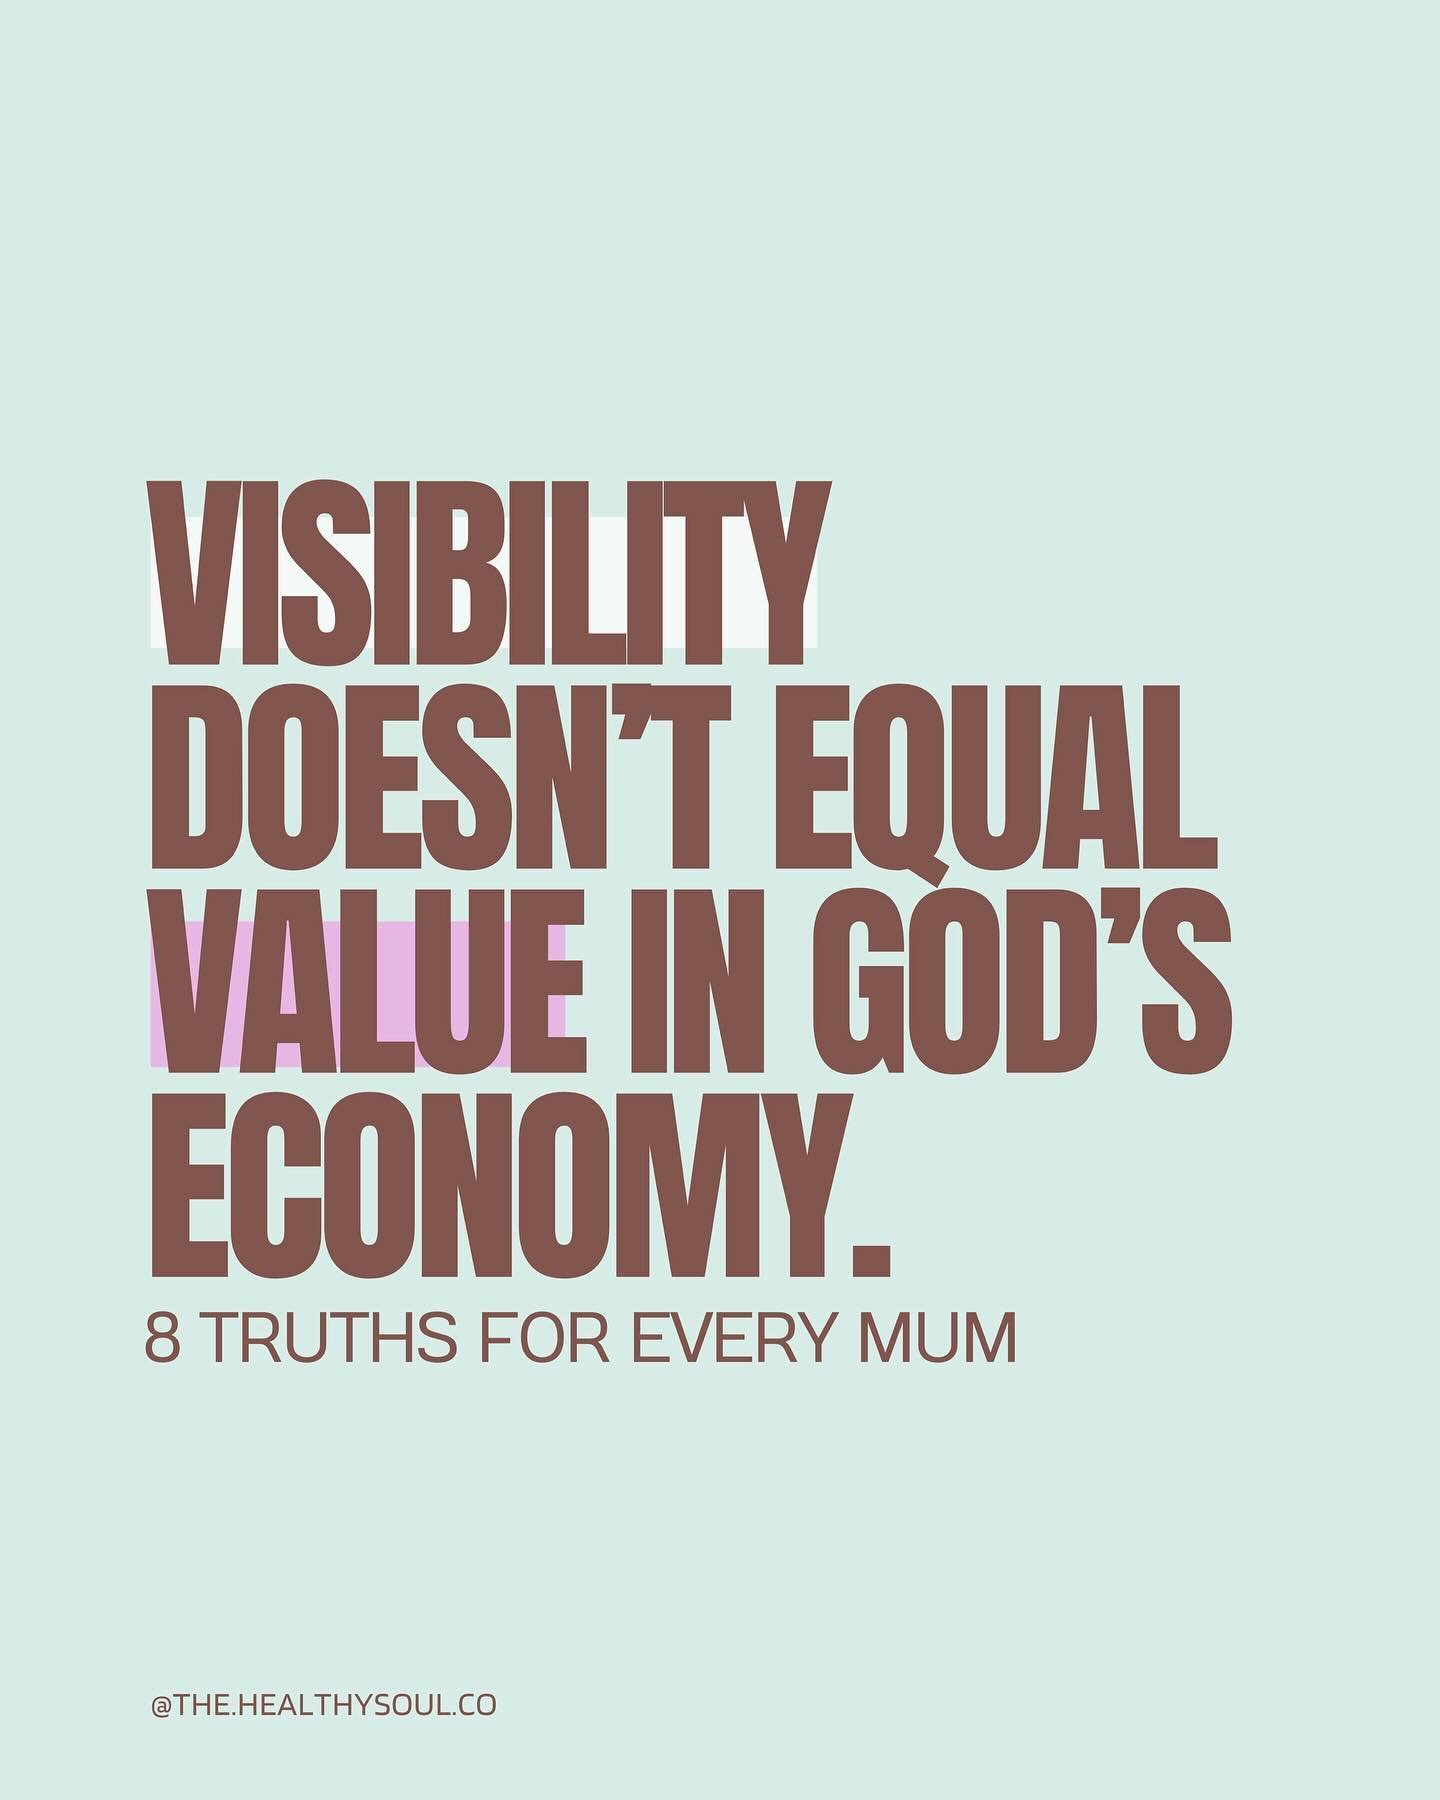 8 truths for every mum!

1. You are chosen
2. You are seen
3. You&rsquo;re graced for this
4. What you do matters
5. Your time is never wasted (it&rsquo;s invested)
6. Your prayers are powerful 
7. You&rsquo;re more than enough (In Him)
8. You can wa